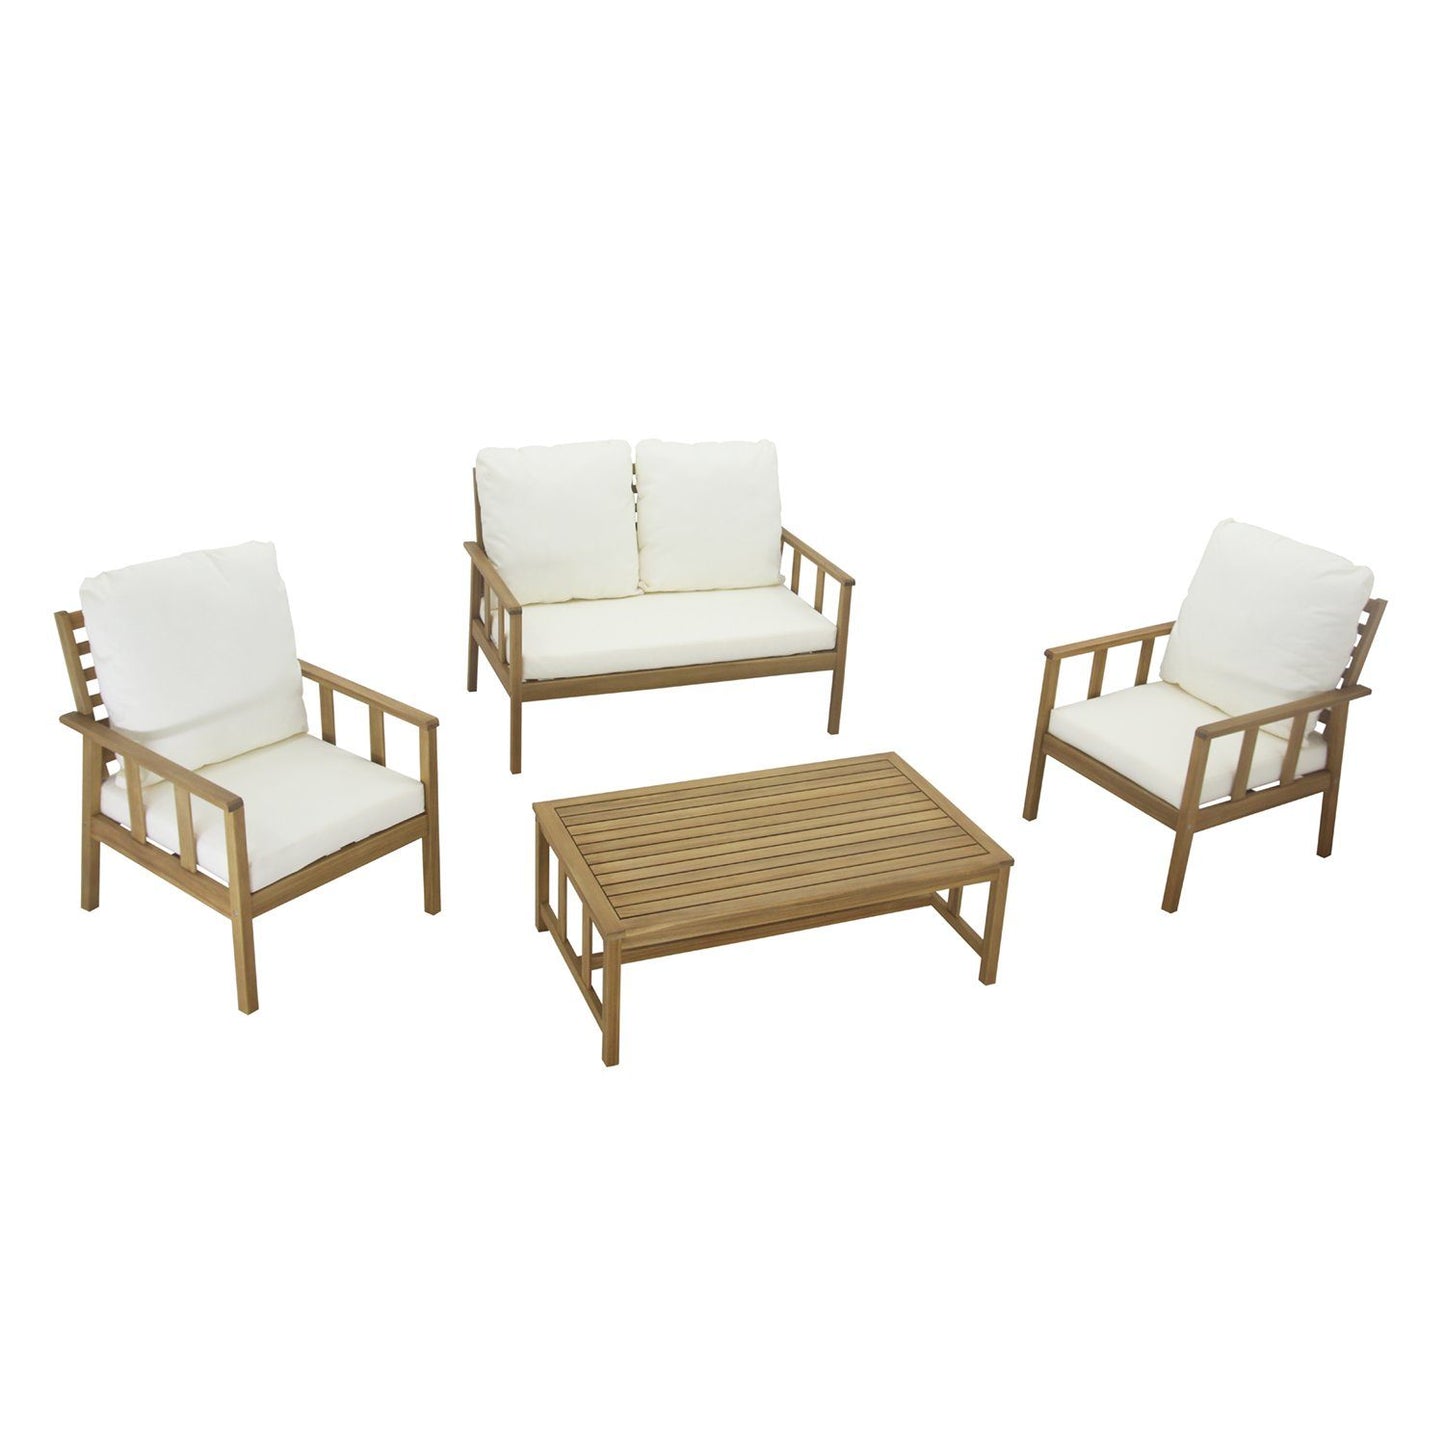 Harrelson outdoor sofa set with grey lean over parasol - solid wood and natural